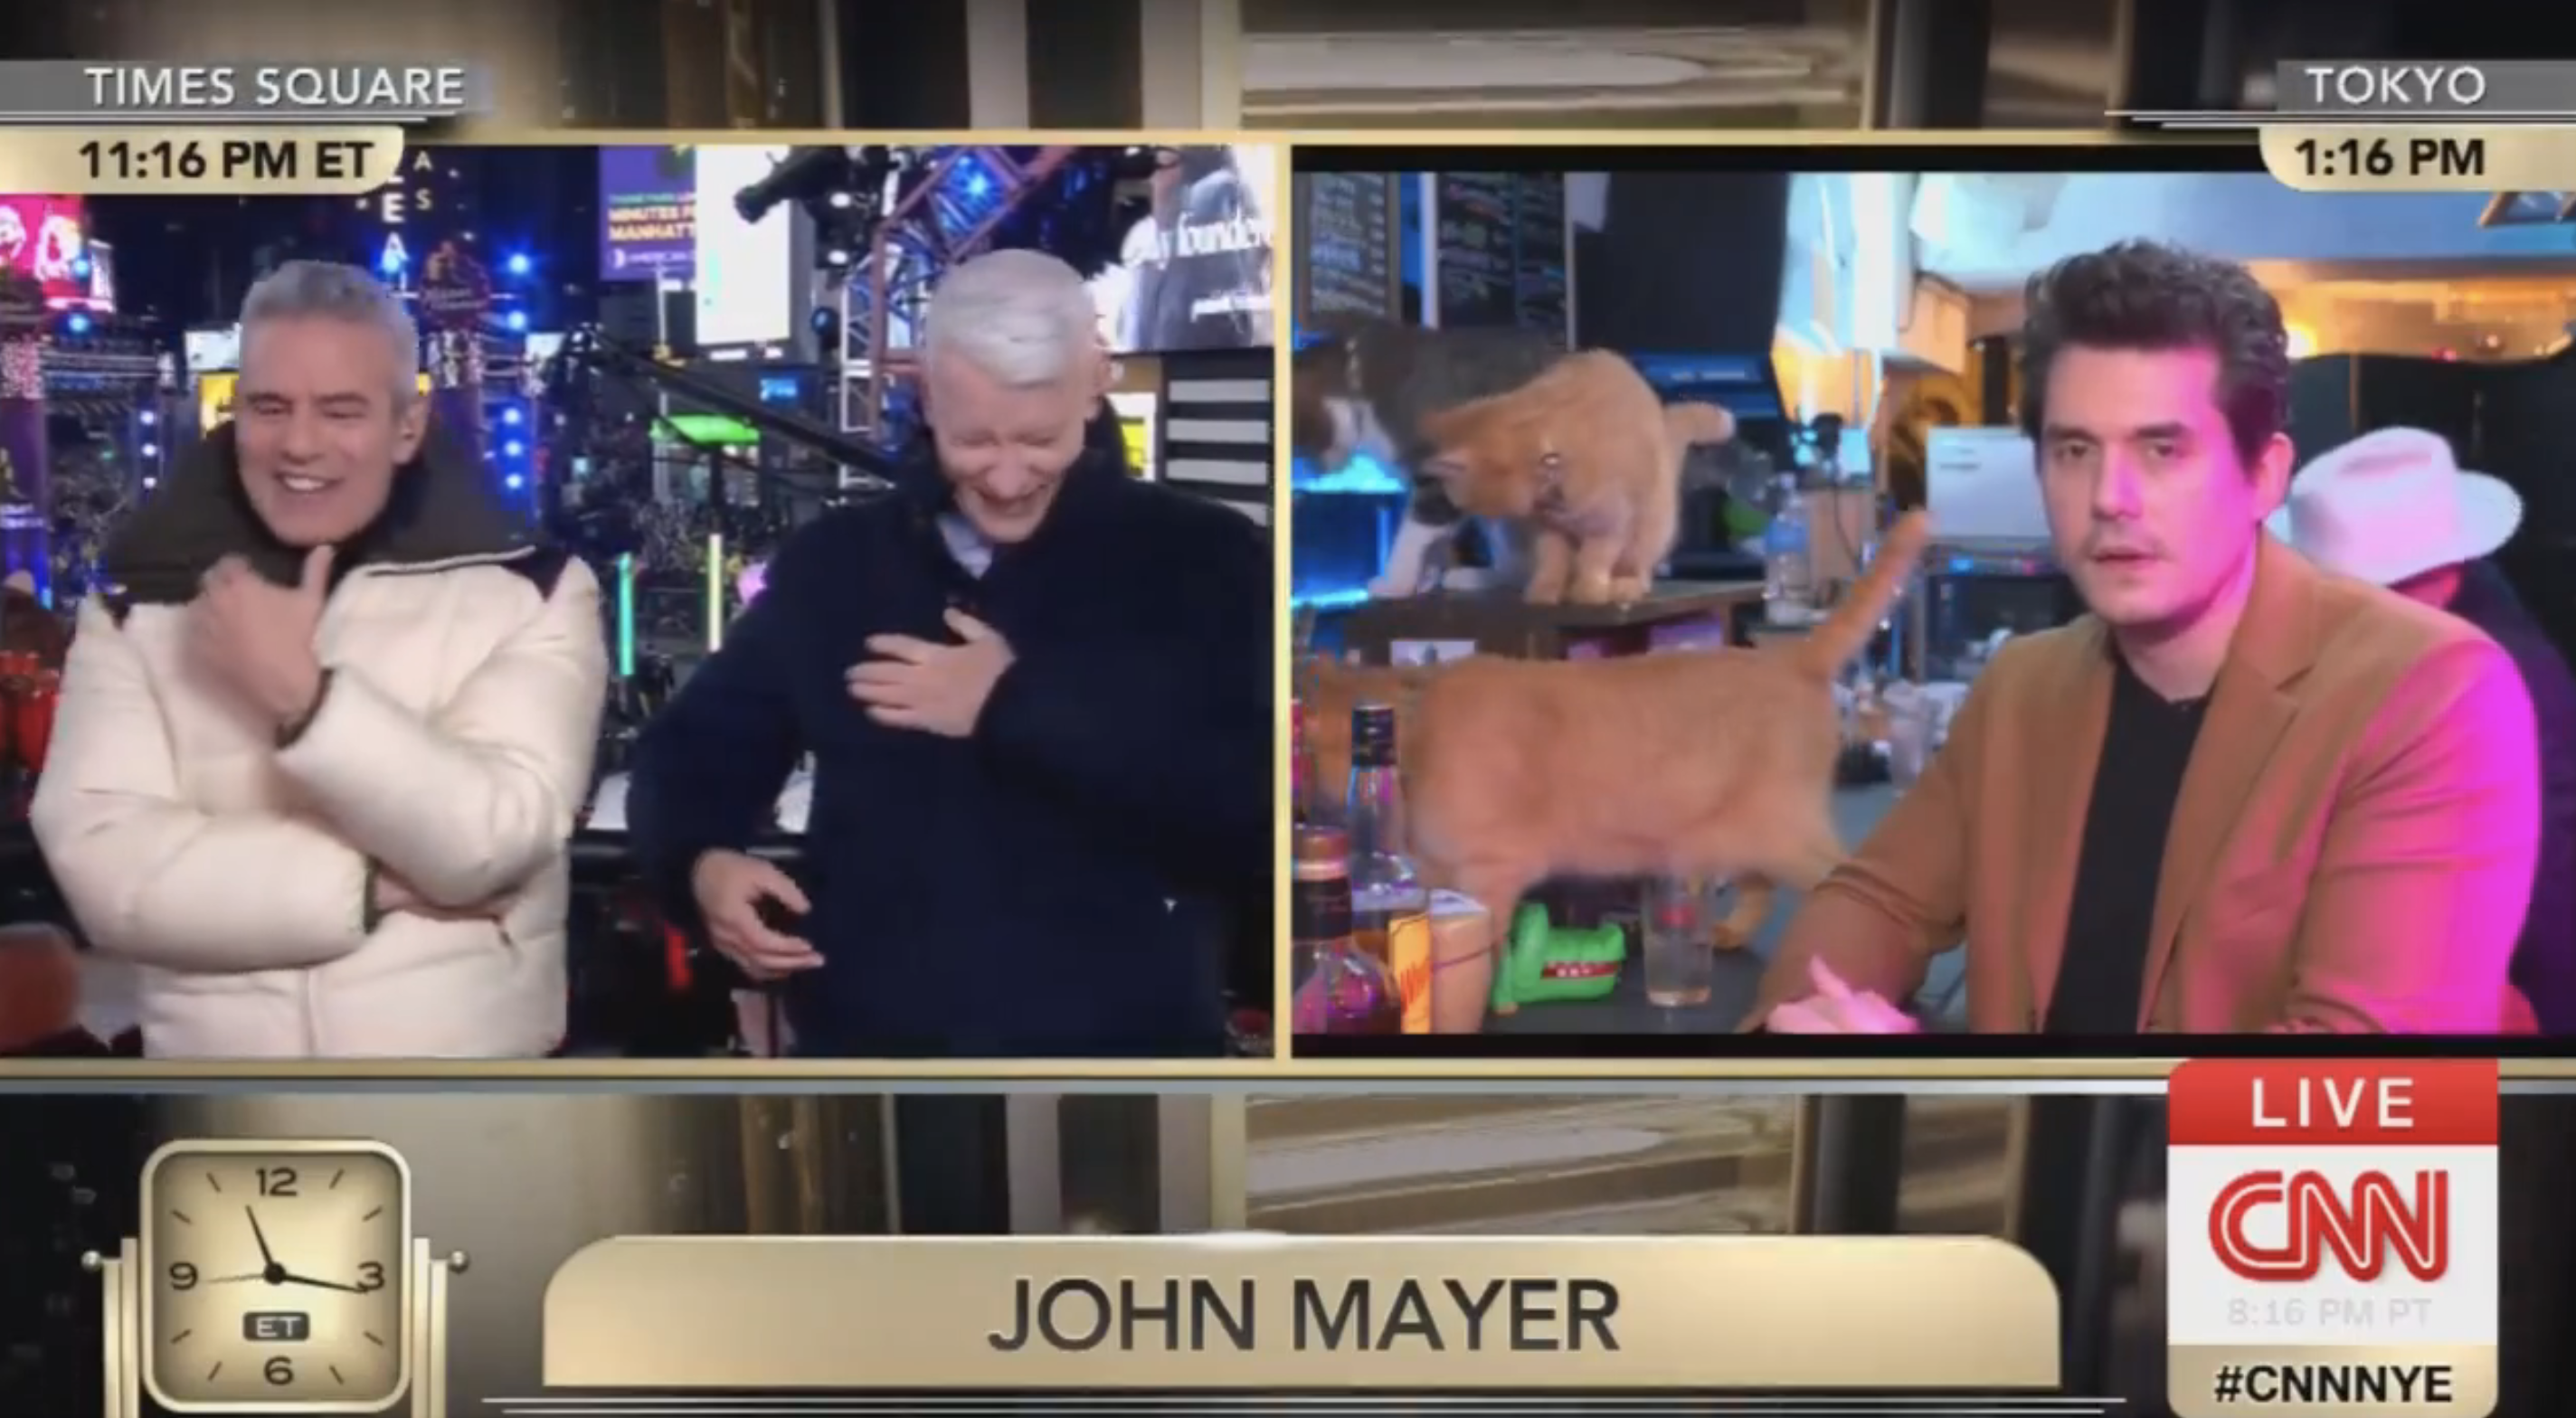 John Mayer on live tv with Anderson Cooper and Andy Cohen